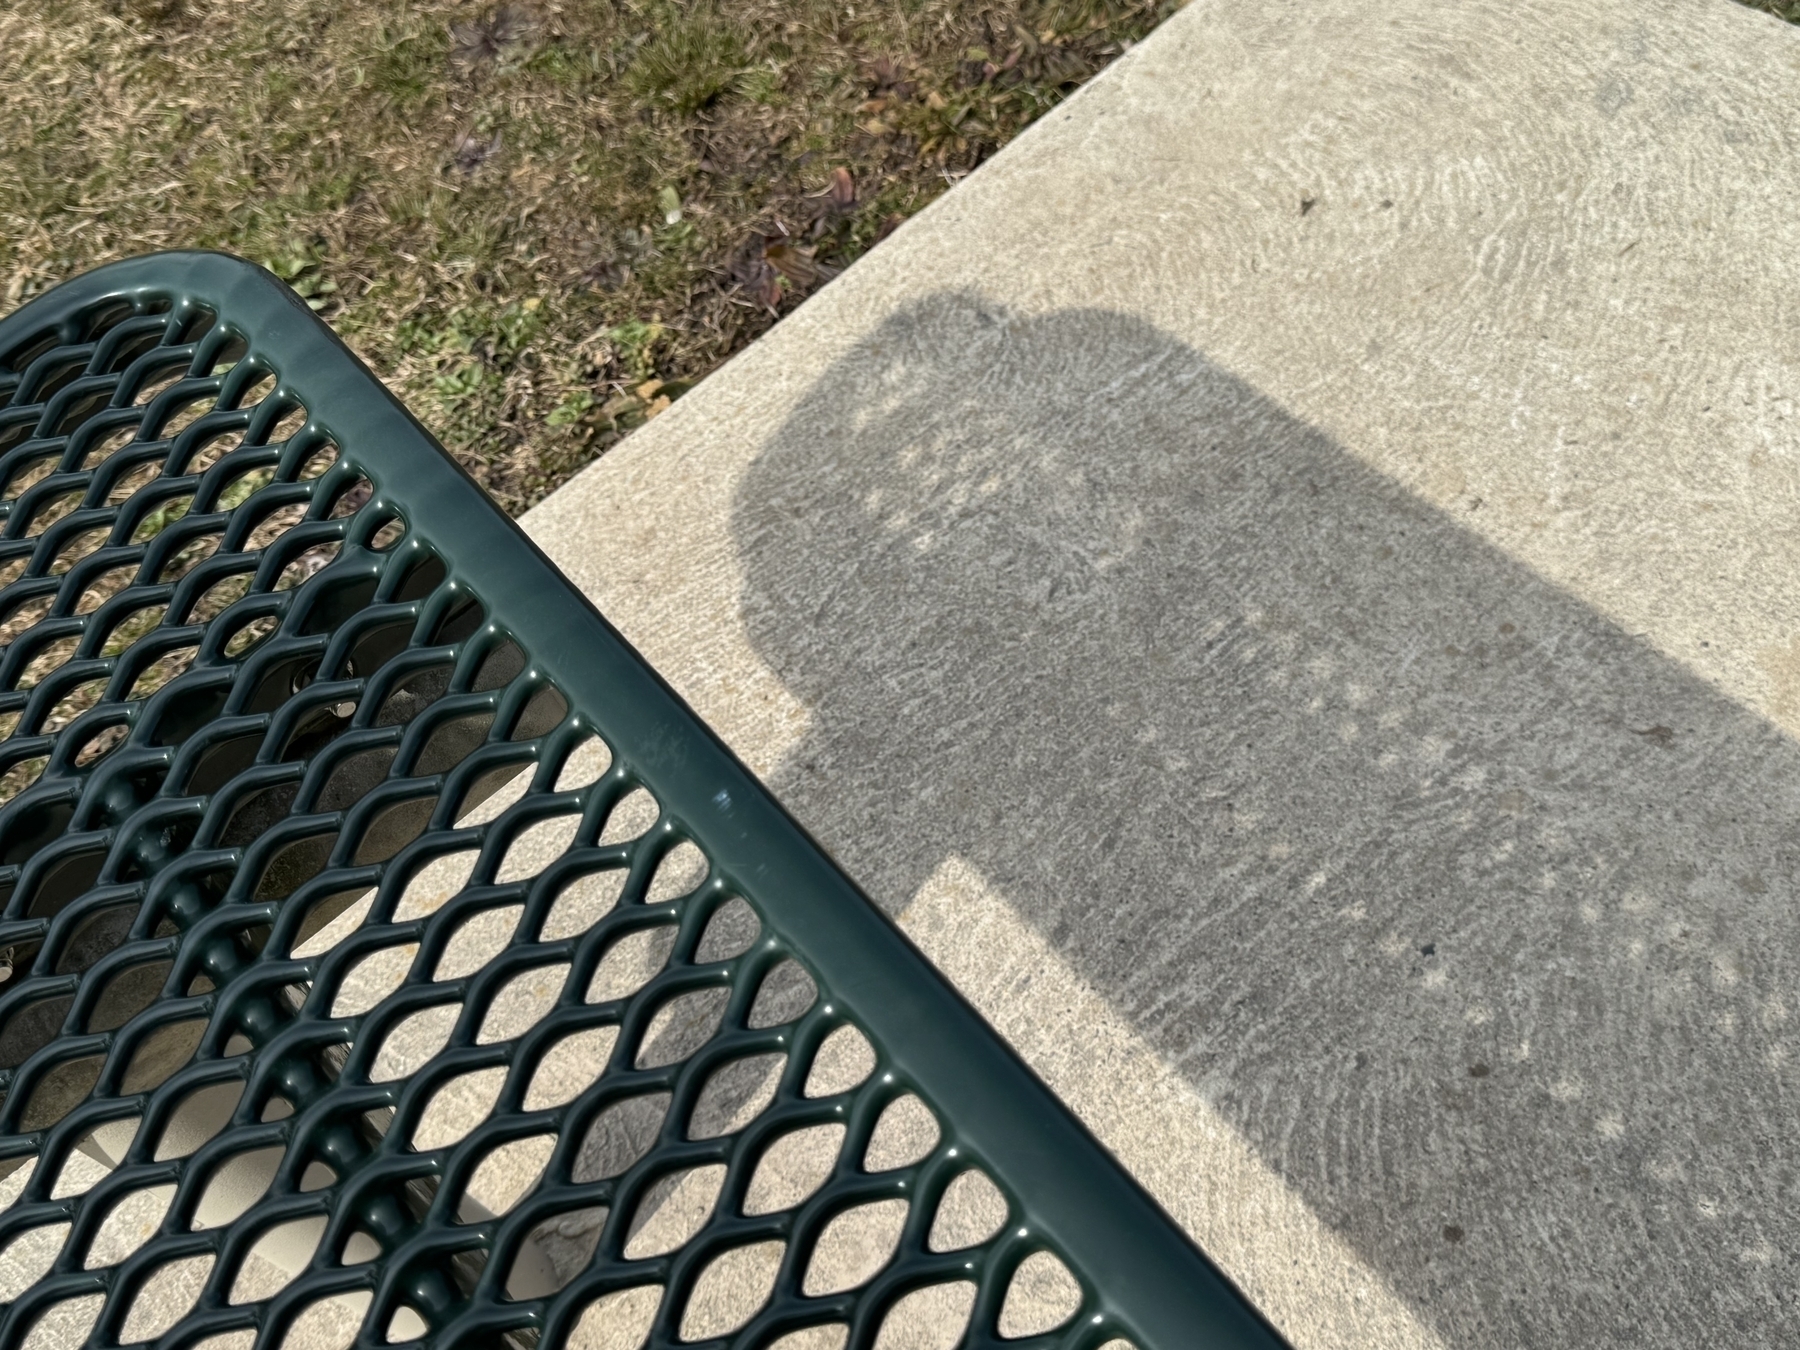 Park bench and shadow. 